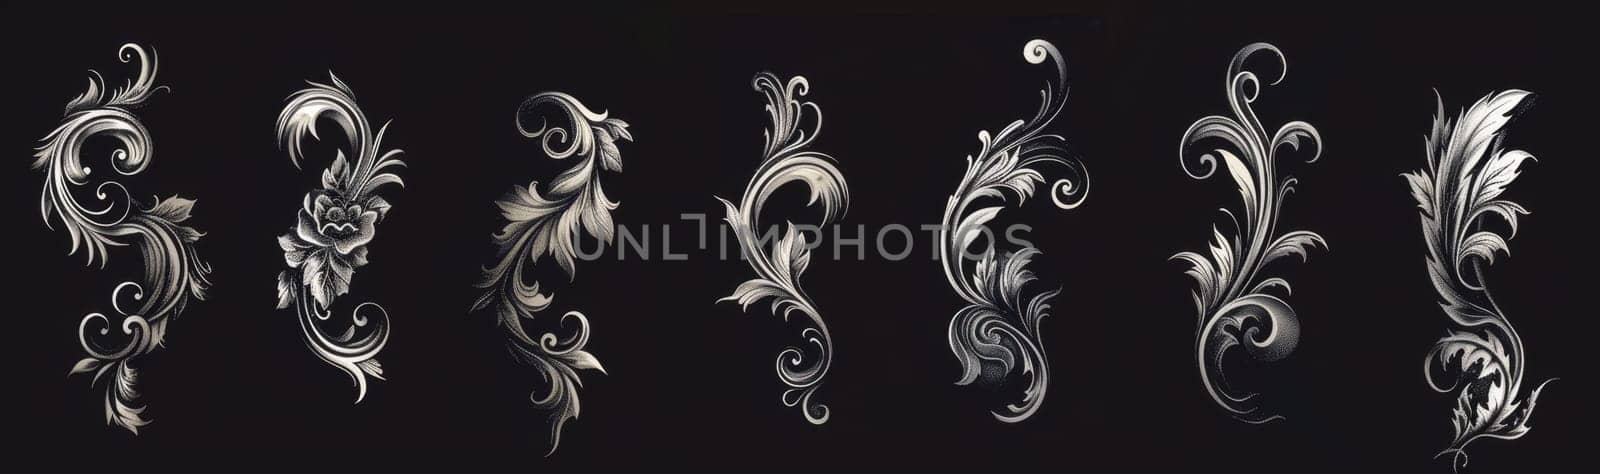 Collection of black flourish artwork with ornate floral designs and elegant curves presented on a dark background.. by sfinks